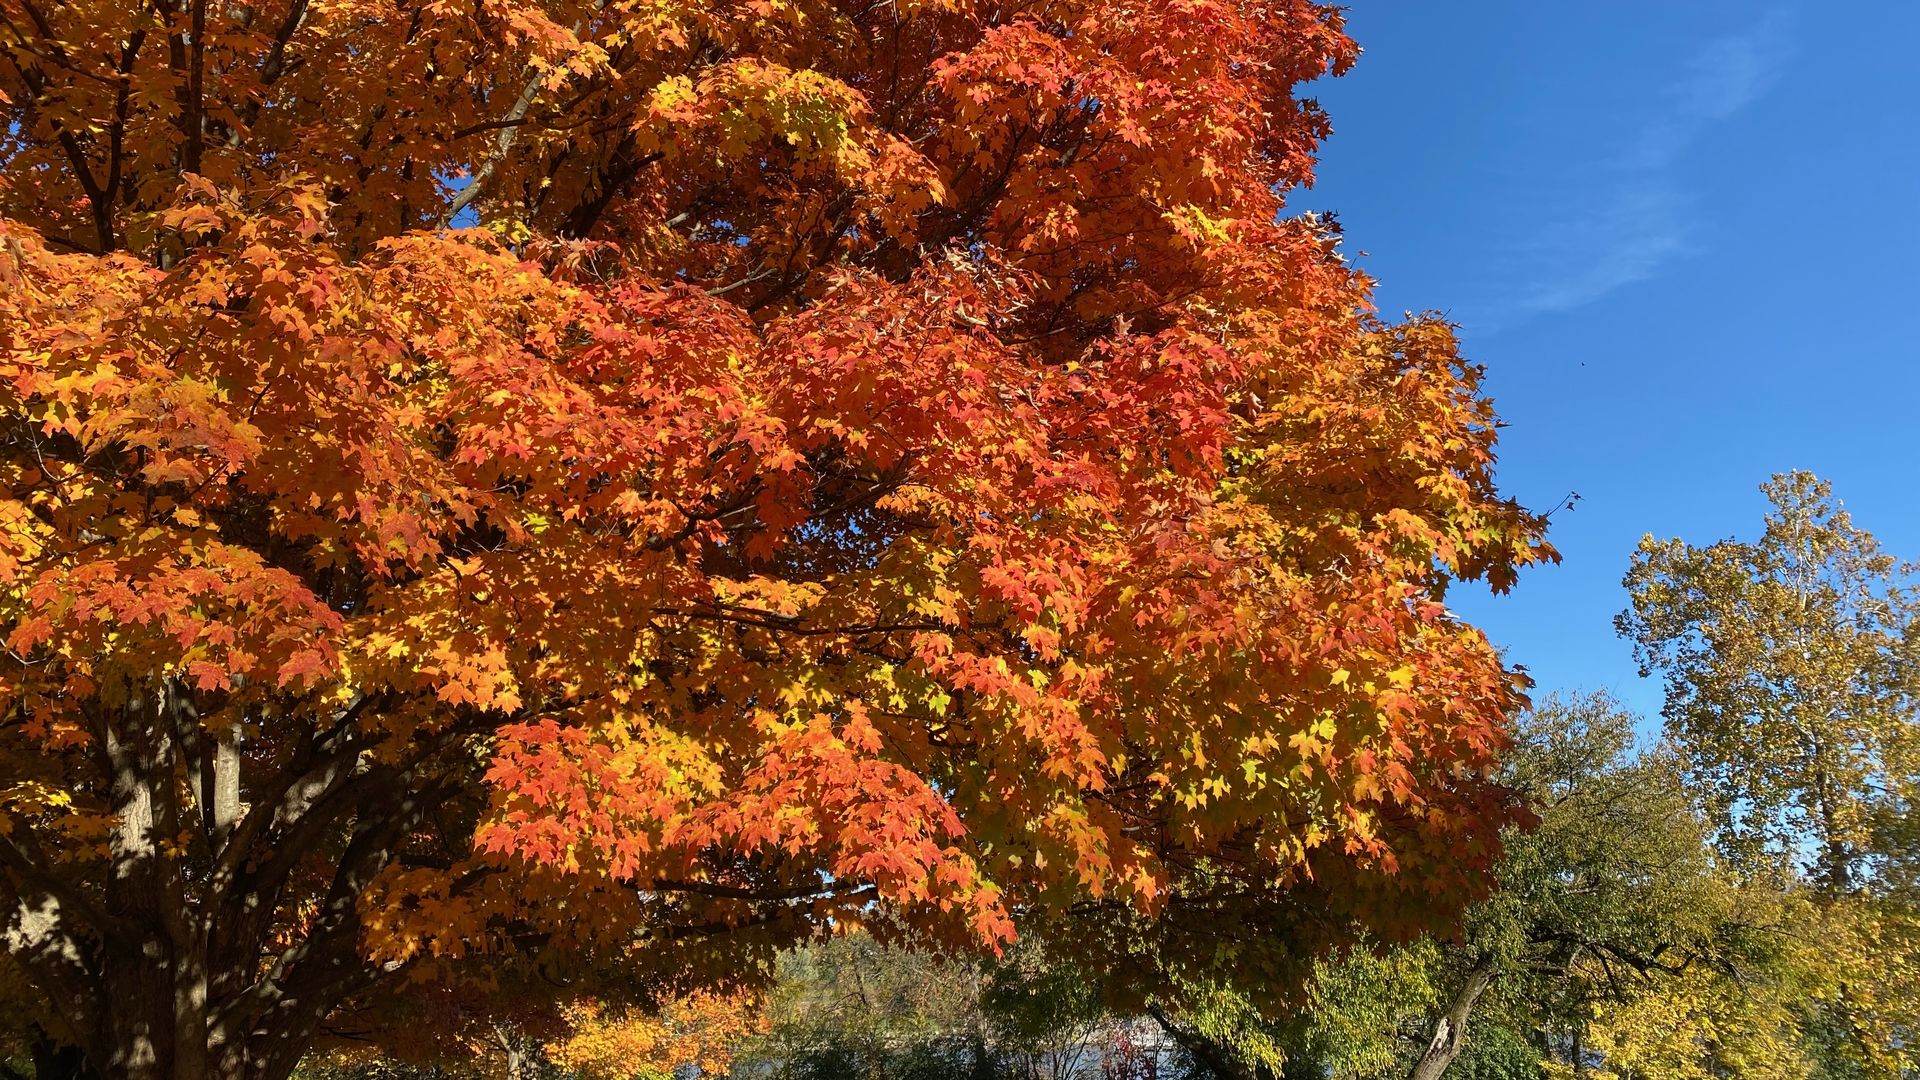 A maple tree with red and orange leaves.